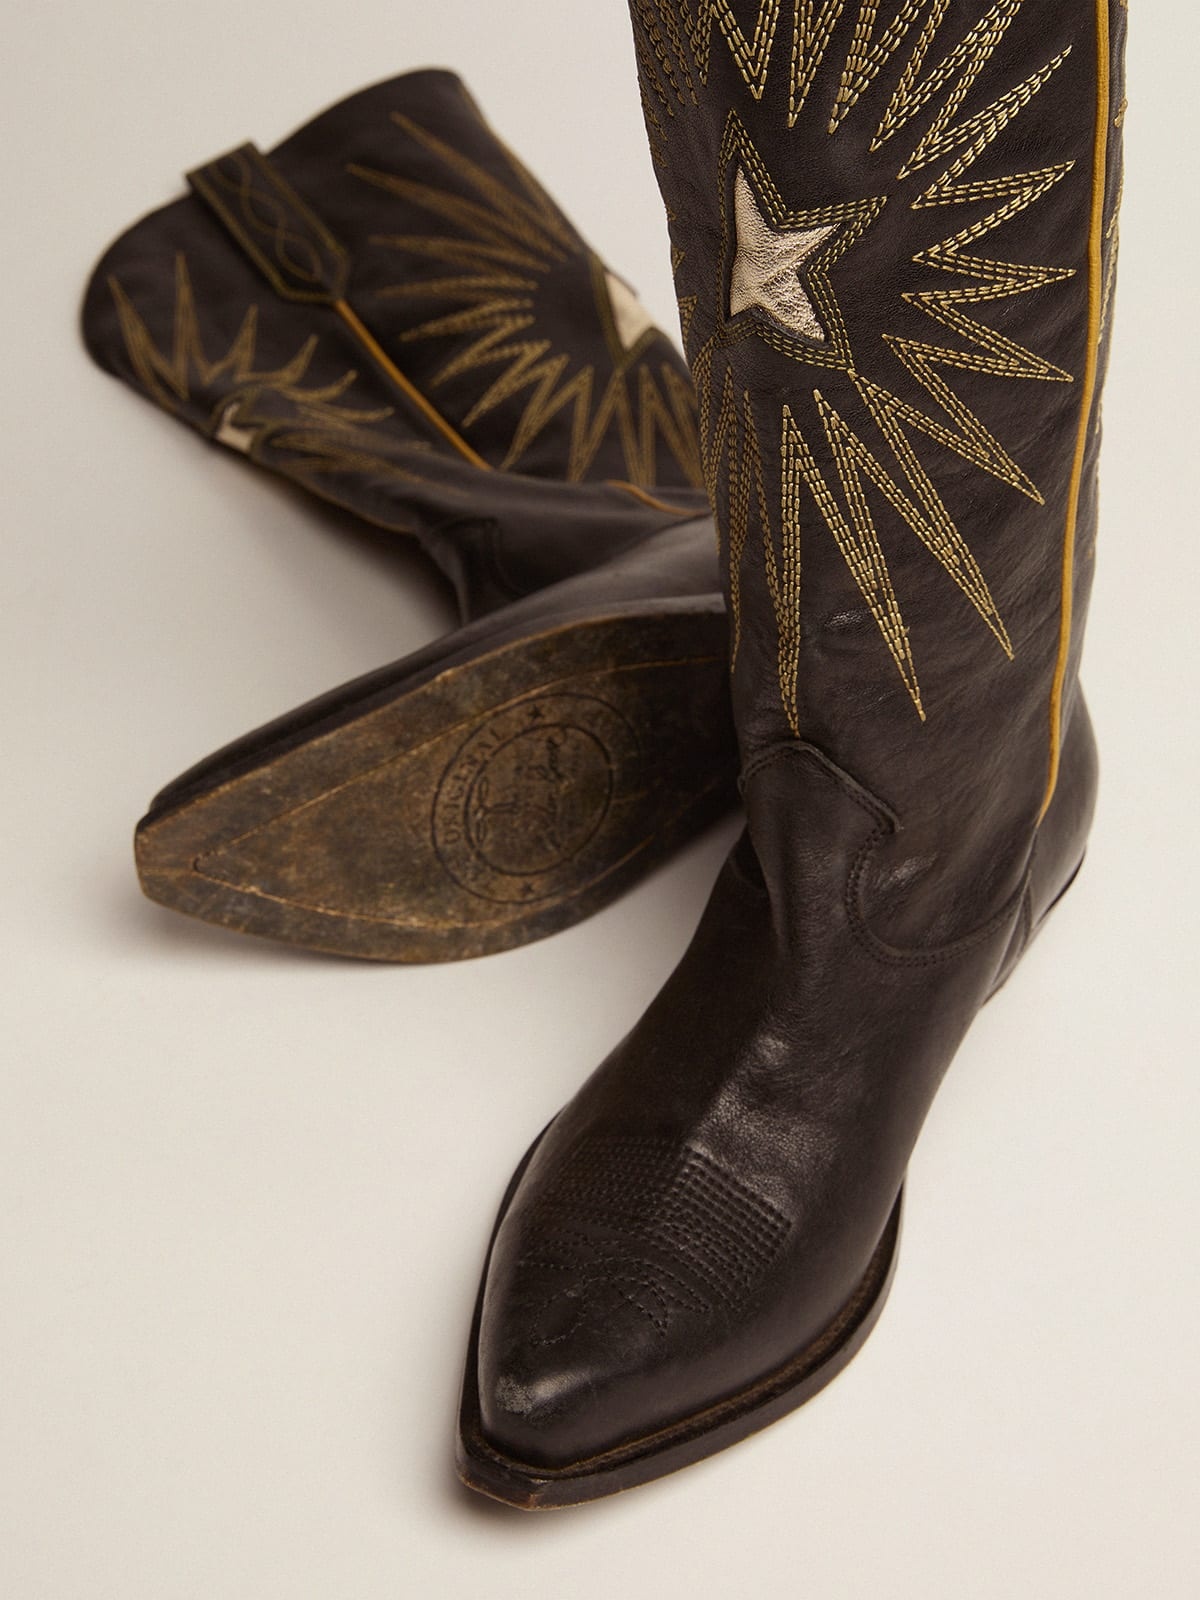 Women's boots in black leather with platinum star inlay - 4